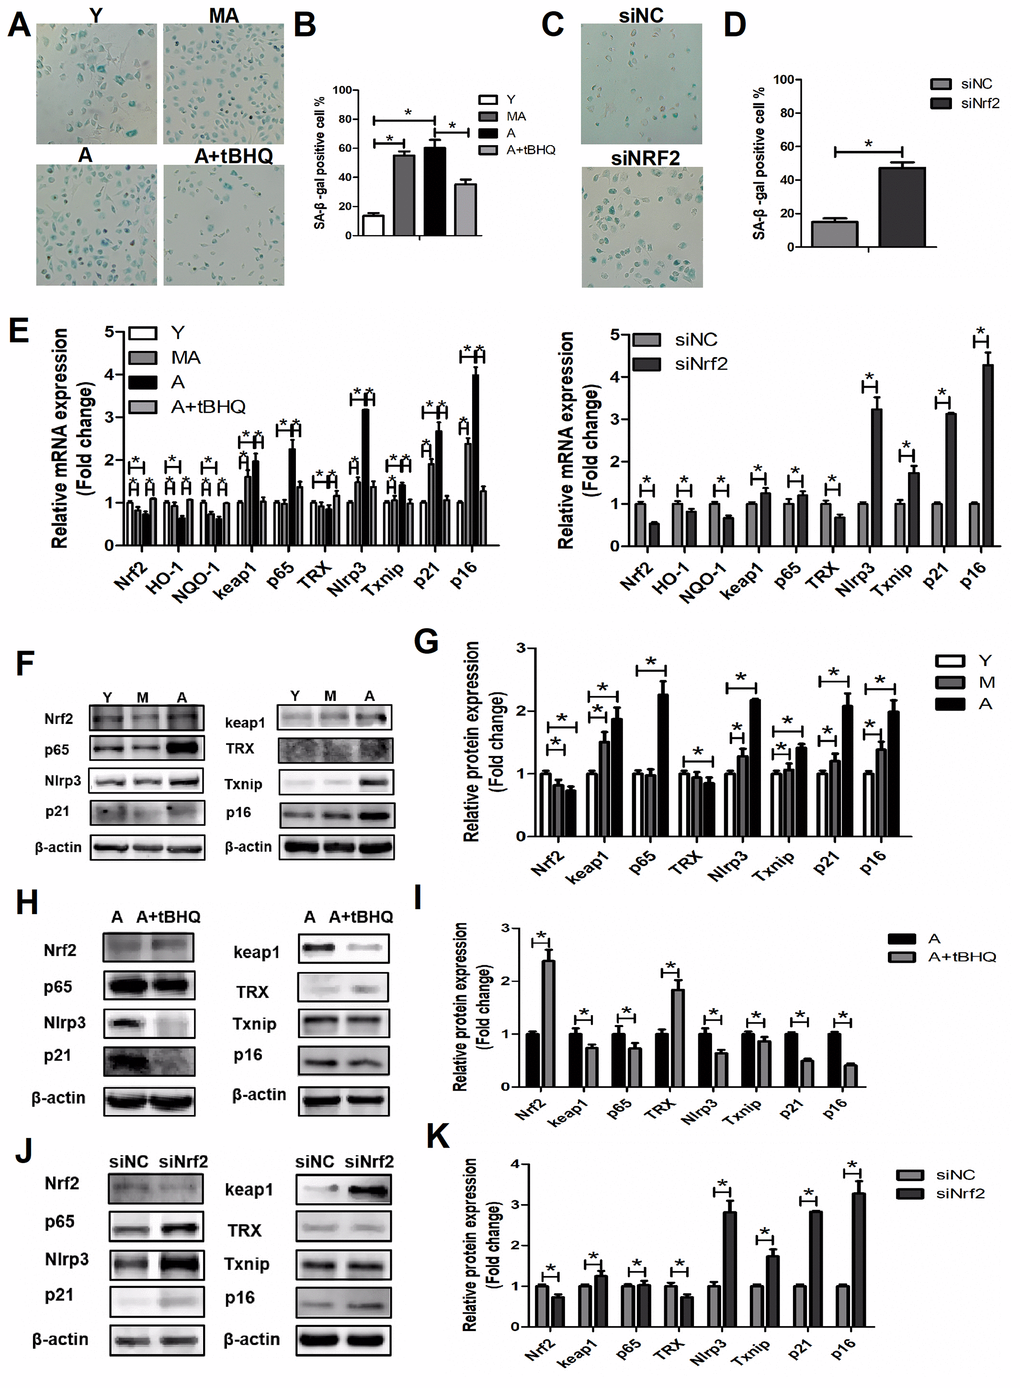 NRF2 suppressed EPC senescence. (A–D) β-galactosidase staining of Y, MA, A, A+tBHQ, siNC and siNrf2 EPCs. (E) Expression of Nrf2, Ho-1, Nqo-1, Keap1, p65, Trx, Nlrp3, Txnip, p21 and p16 mRNA in Y, MA, A, A+tBHQ, siNC and siNrf2 EPCs. (F–K) Representative Western blots and quantitative analysis of NRF2, KEAP1, p65, TRX, NLRP3, TXNIP, p21 and p16 levels in Y, MA, A, A+tBHQ, siNC and siNrf2 EPCs. *P